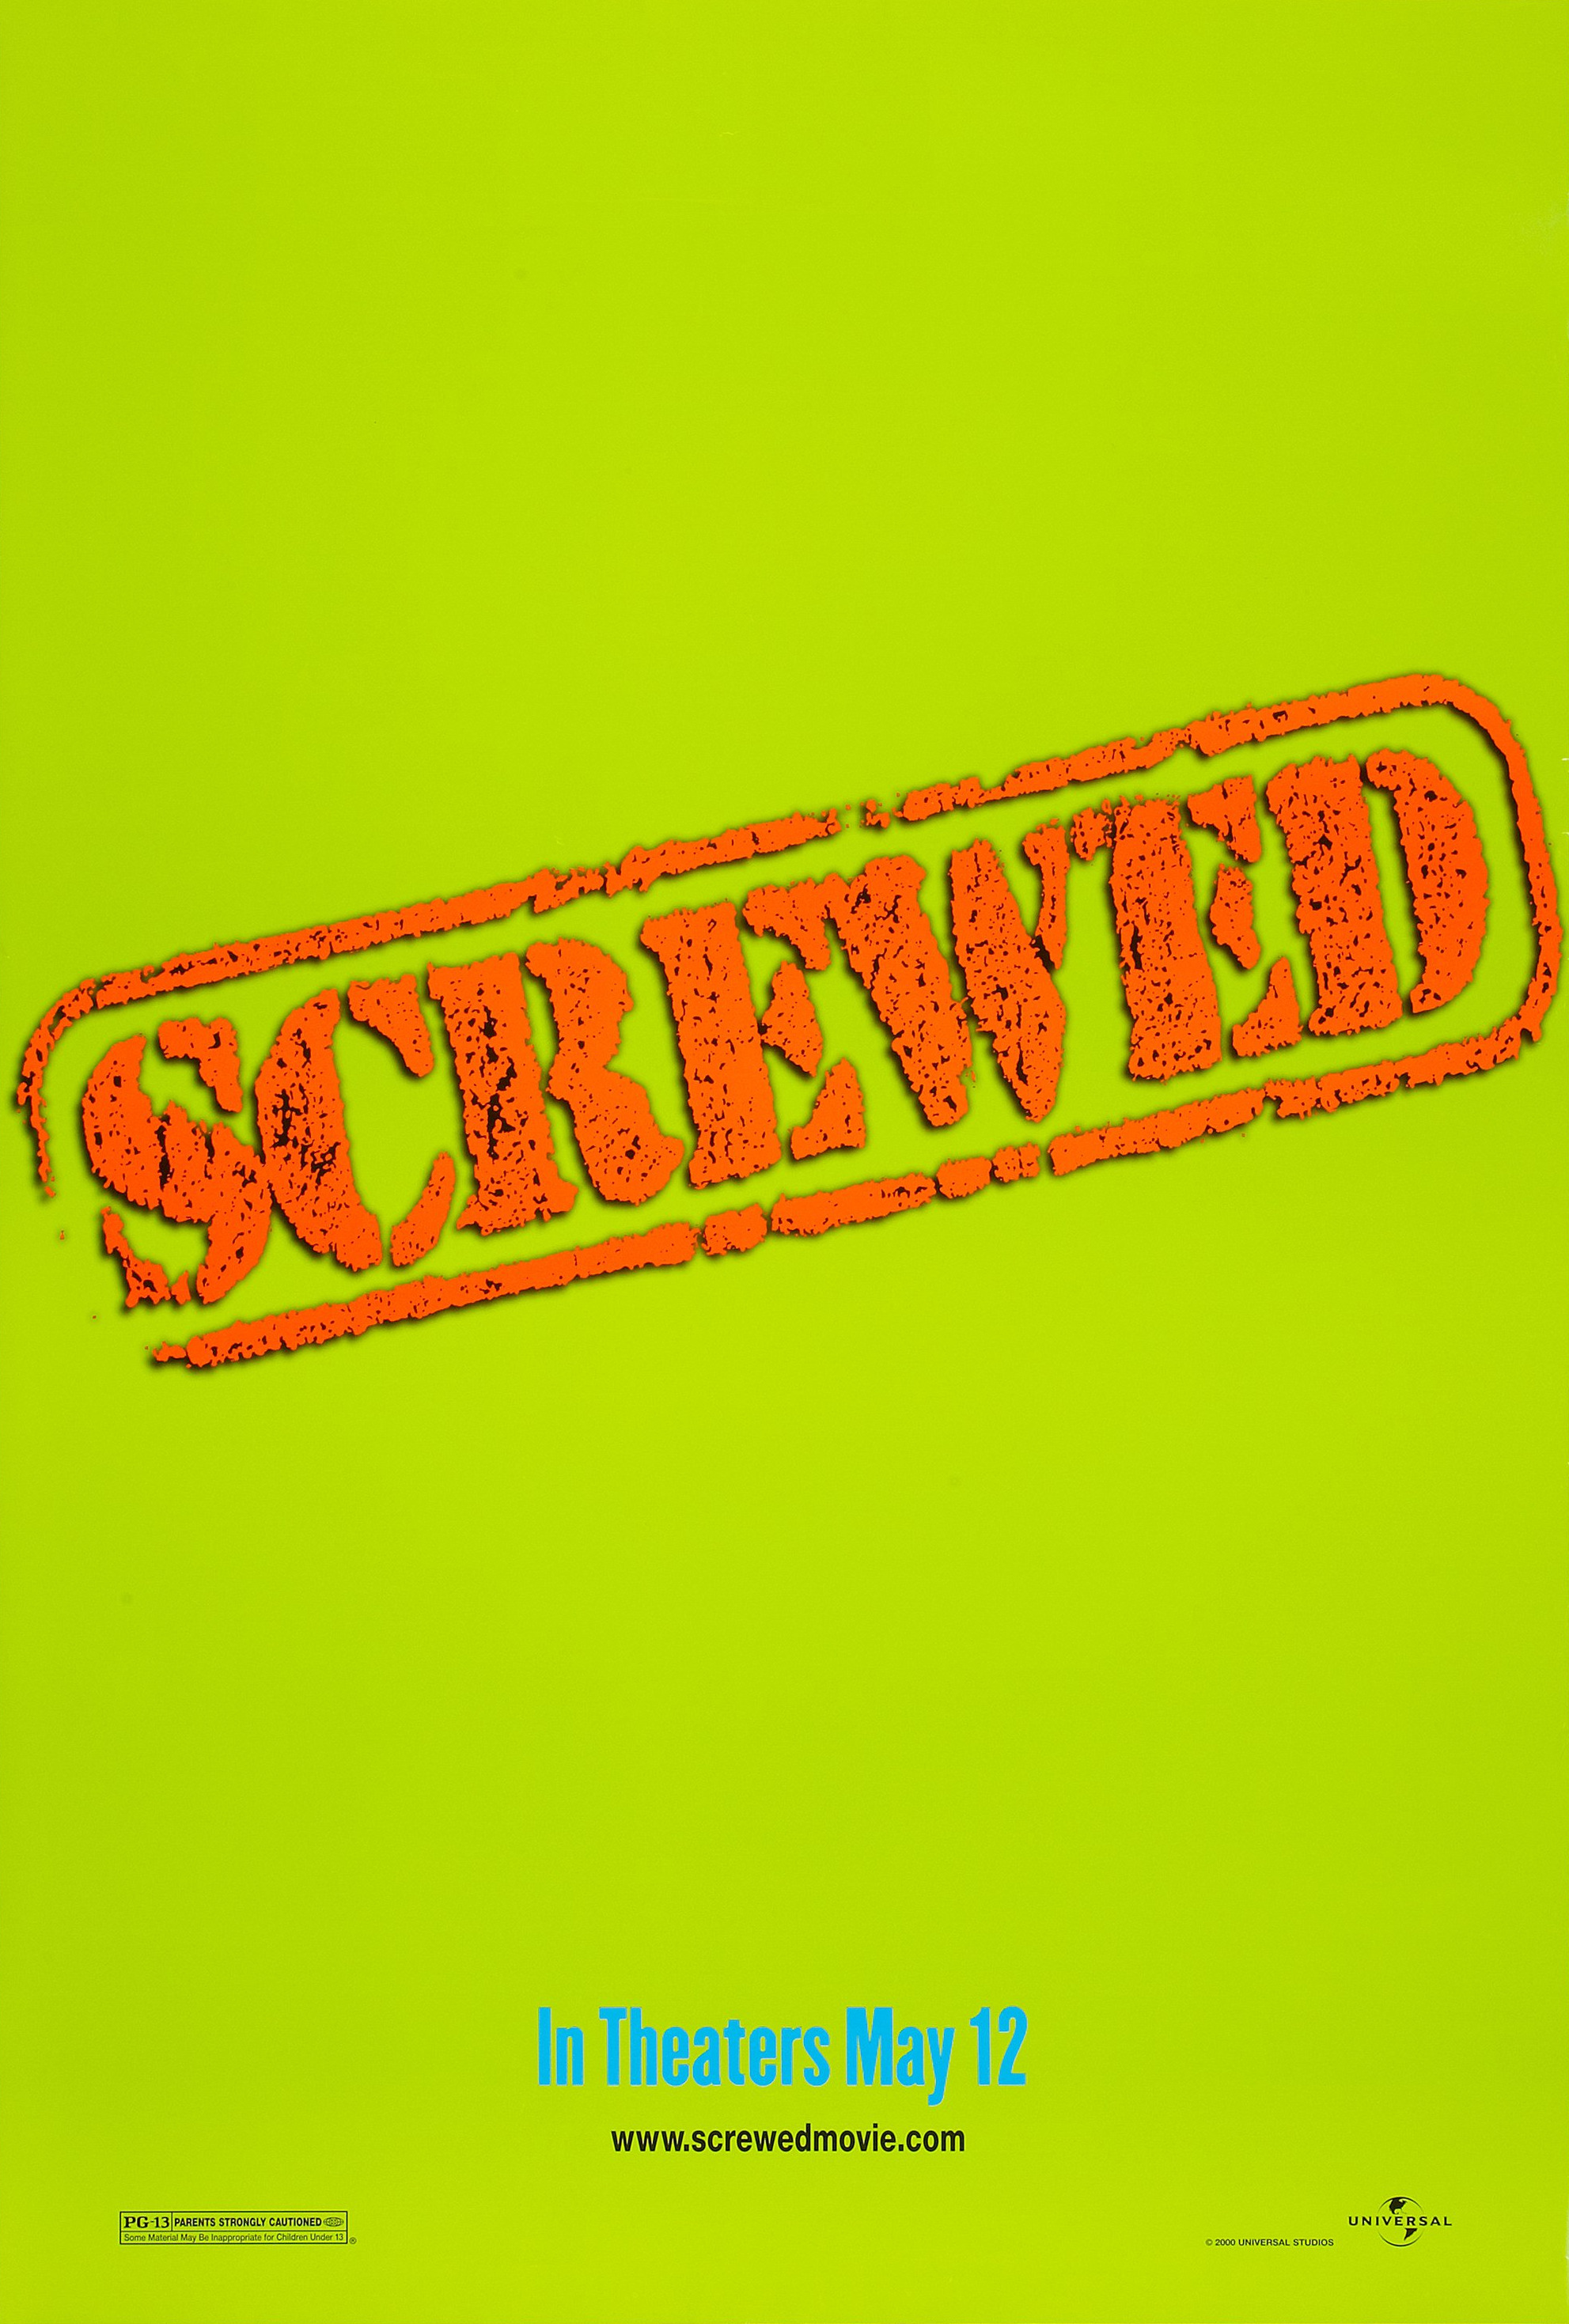 Mega Sized Movie Poster Image for Screwed (#2 of 2)